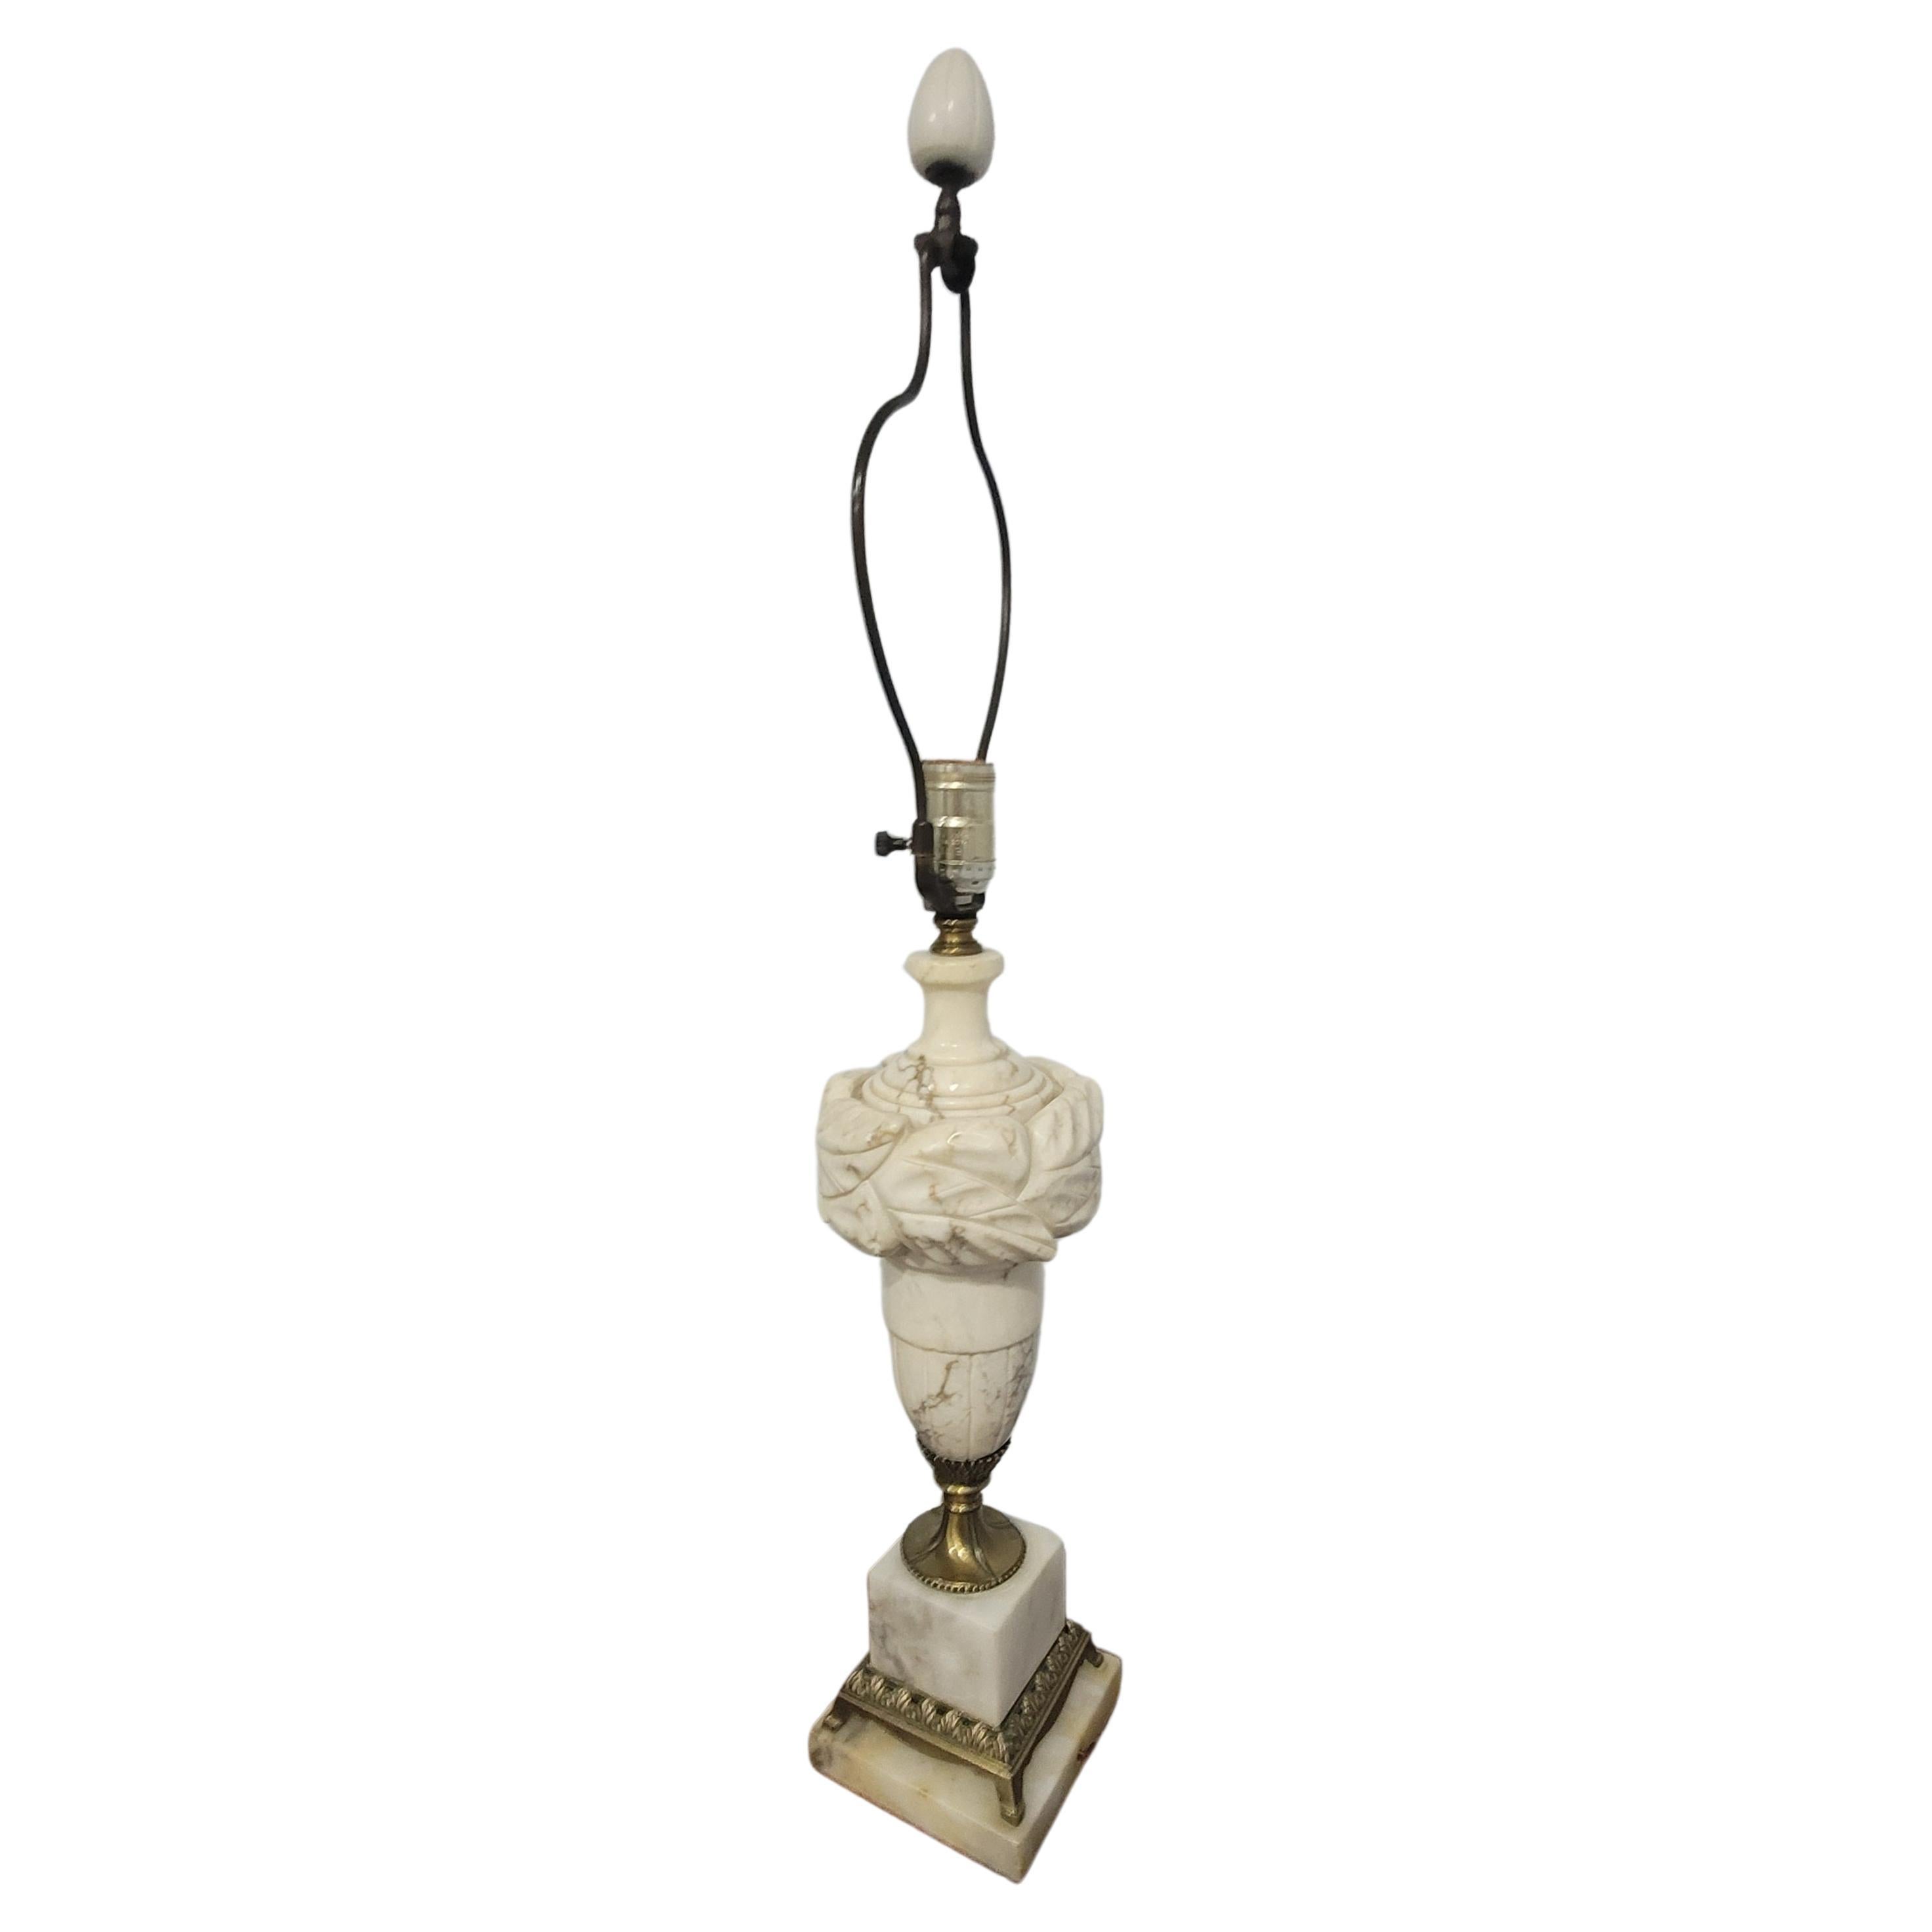 A 1960s vintage Italian carrara Alabaster marble and brass lamp with original harp and finial. 
Measures 5 wide x 5